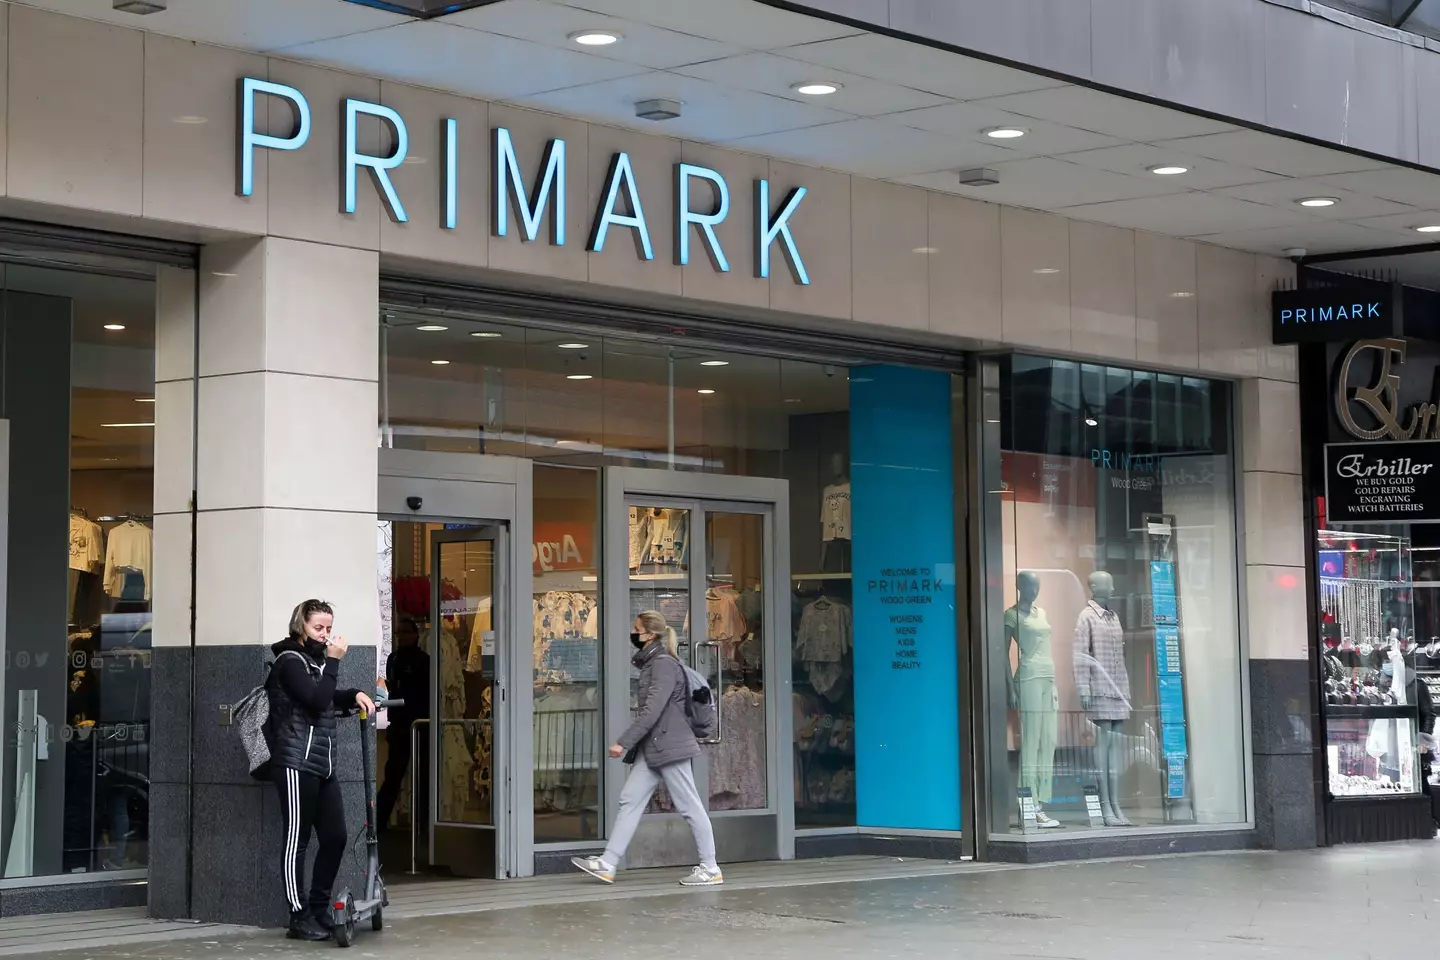 One man said people mistook him for a Primark employee (